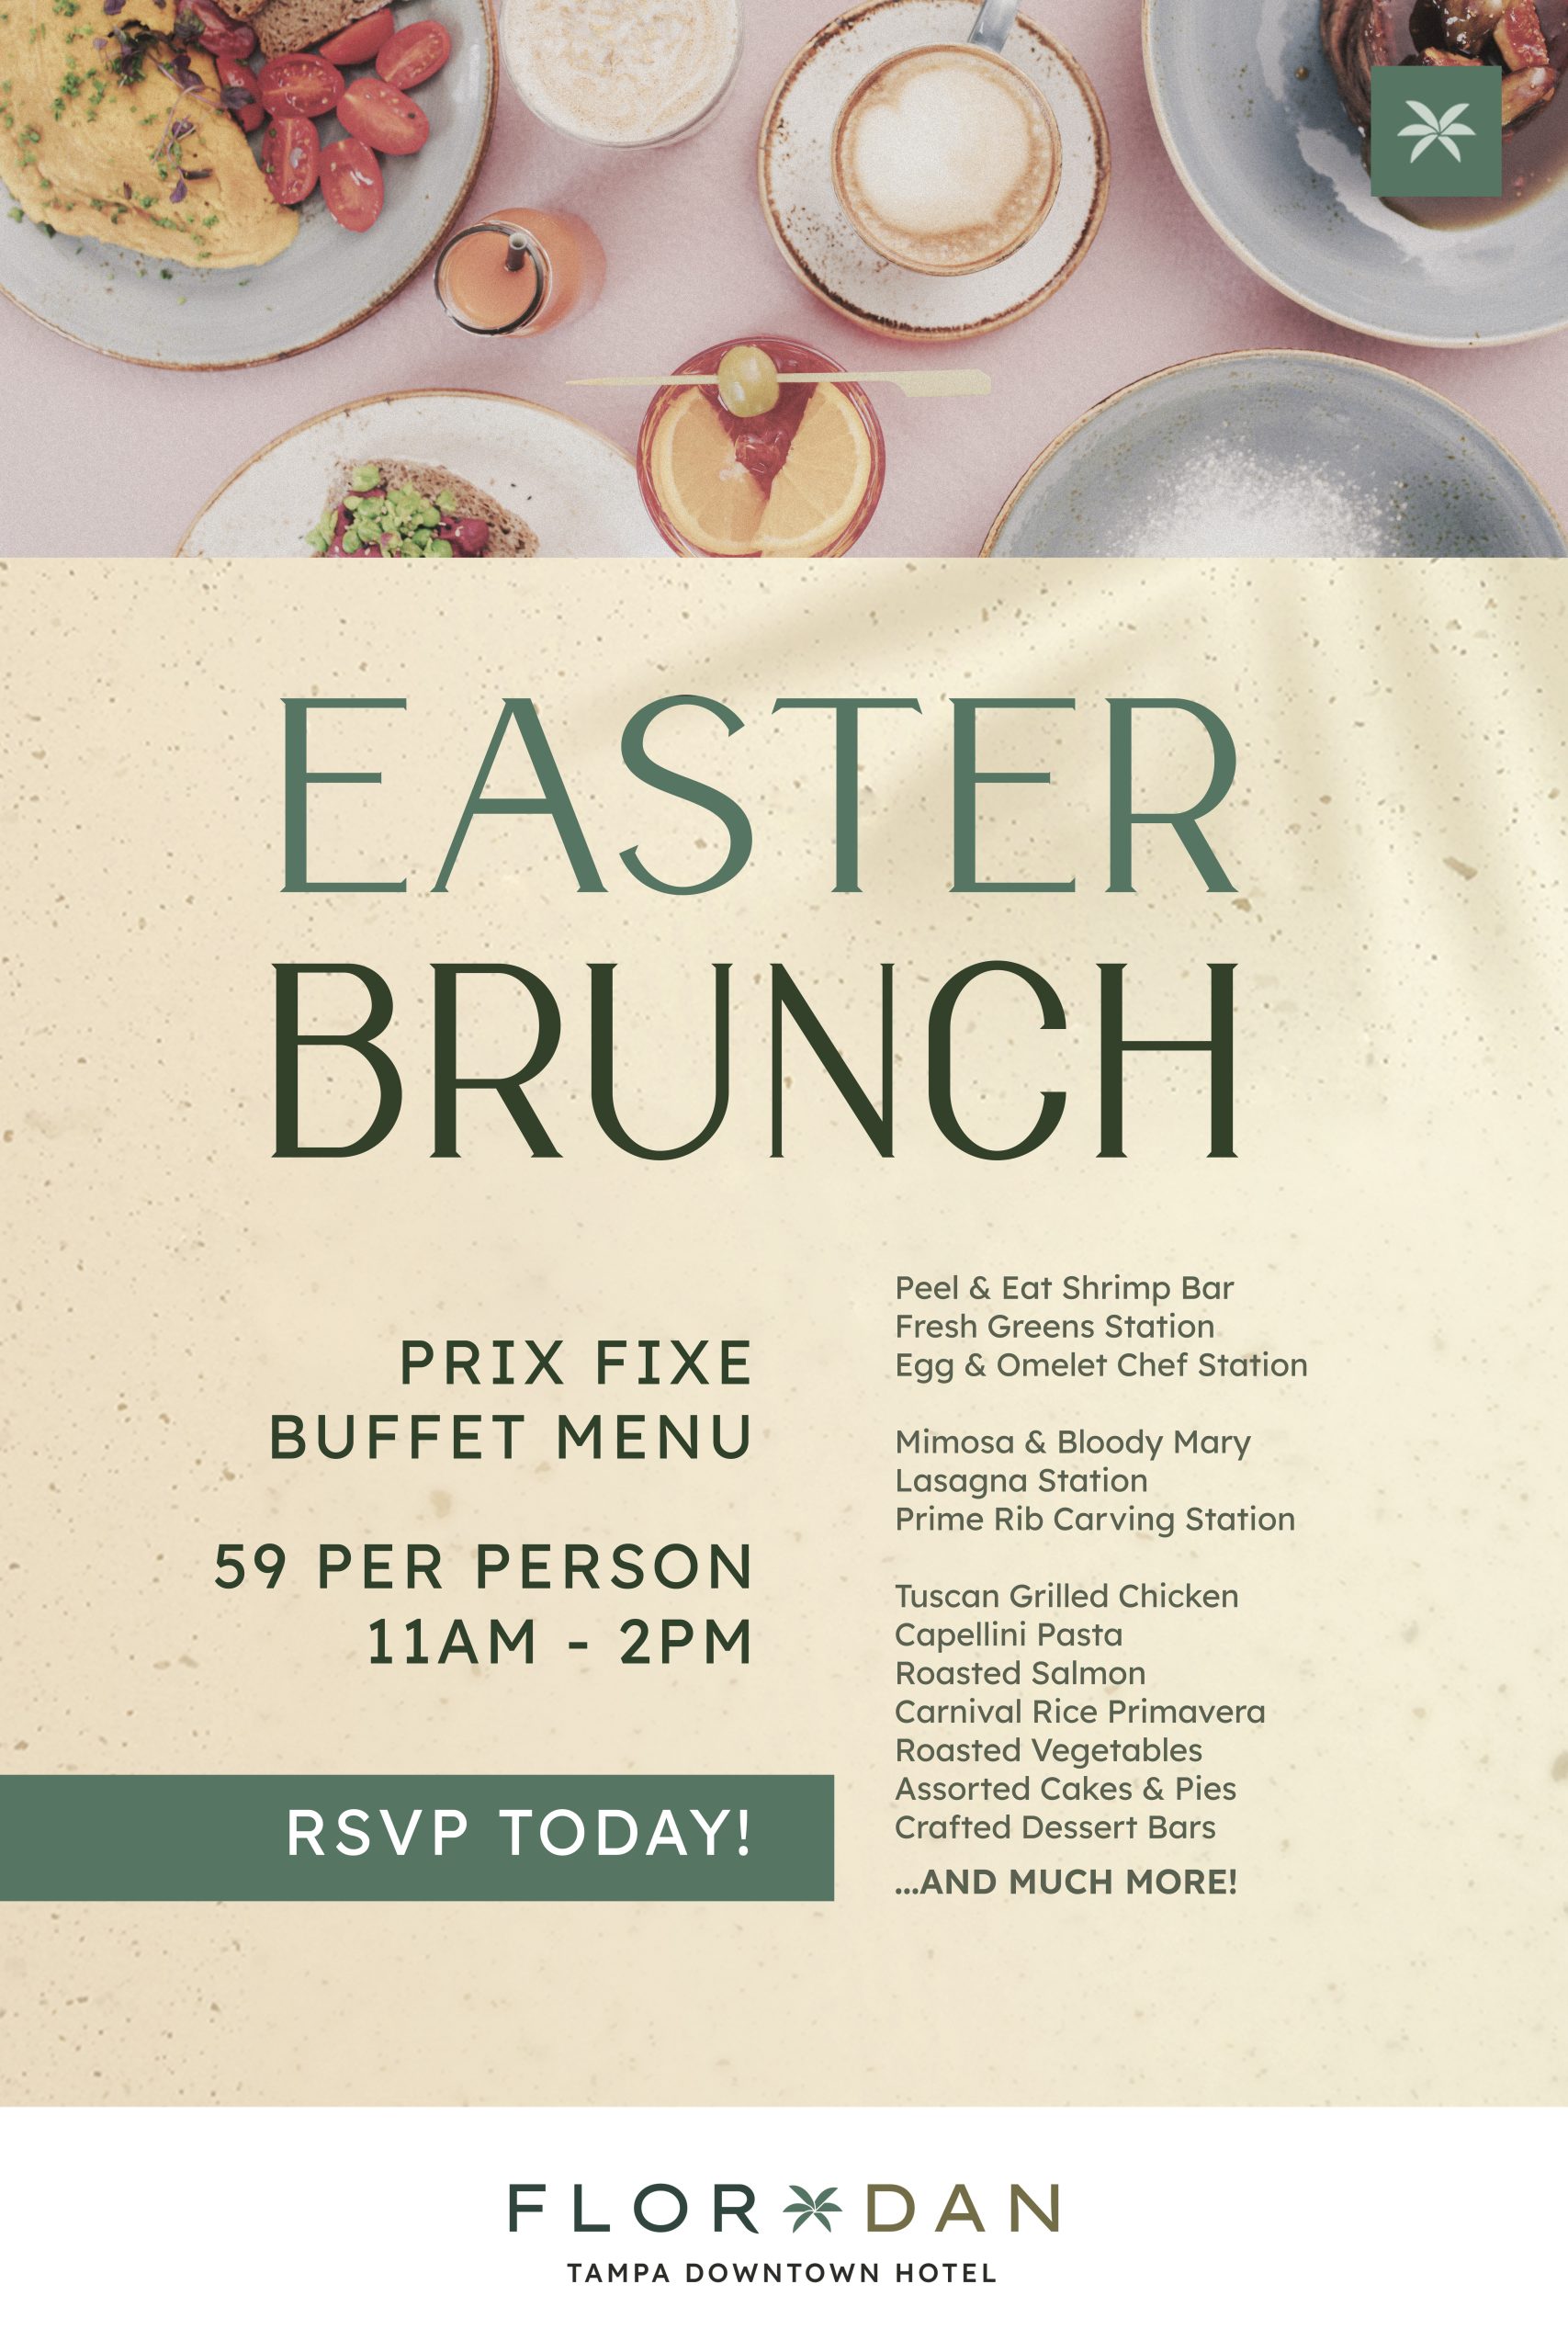 Tampa’s Historic Floridan Palace to Feature All-You-Can-Eat Easter Brunch April 9th